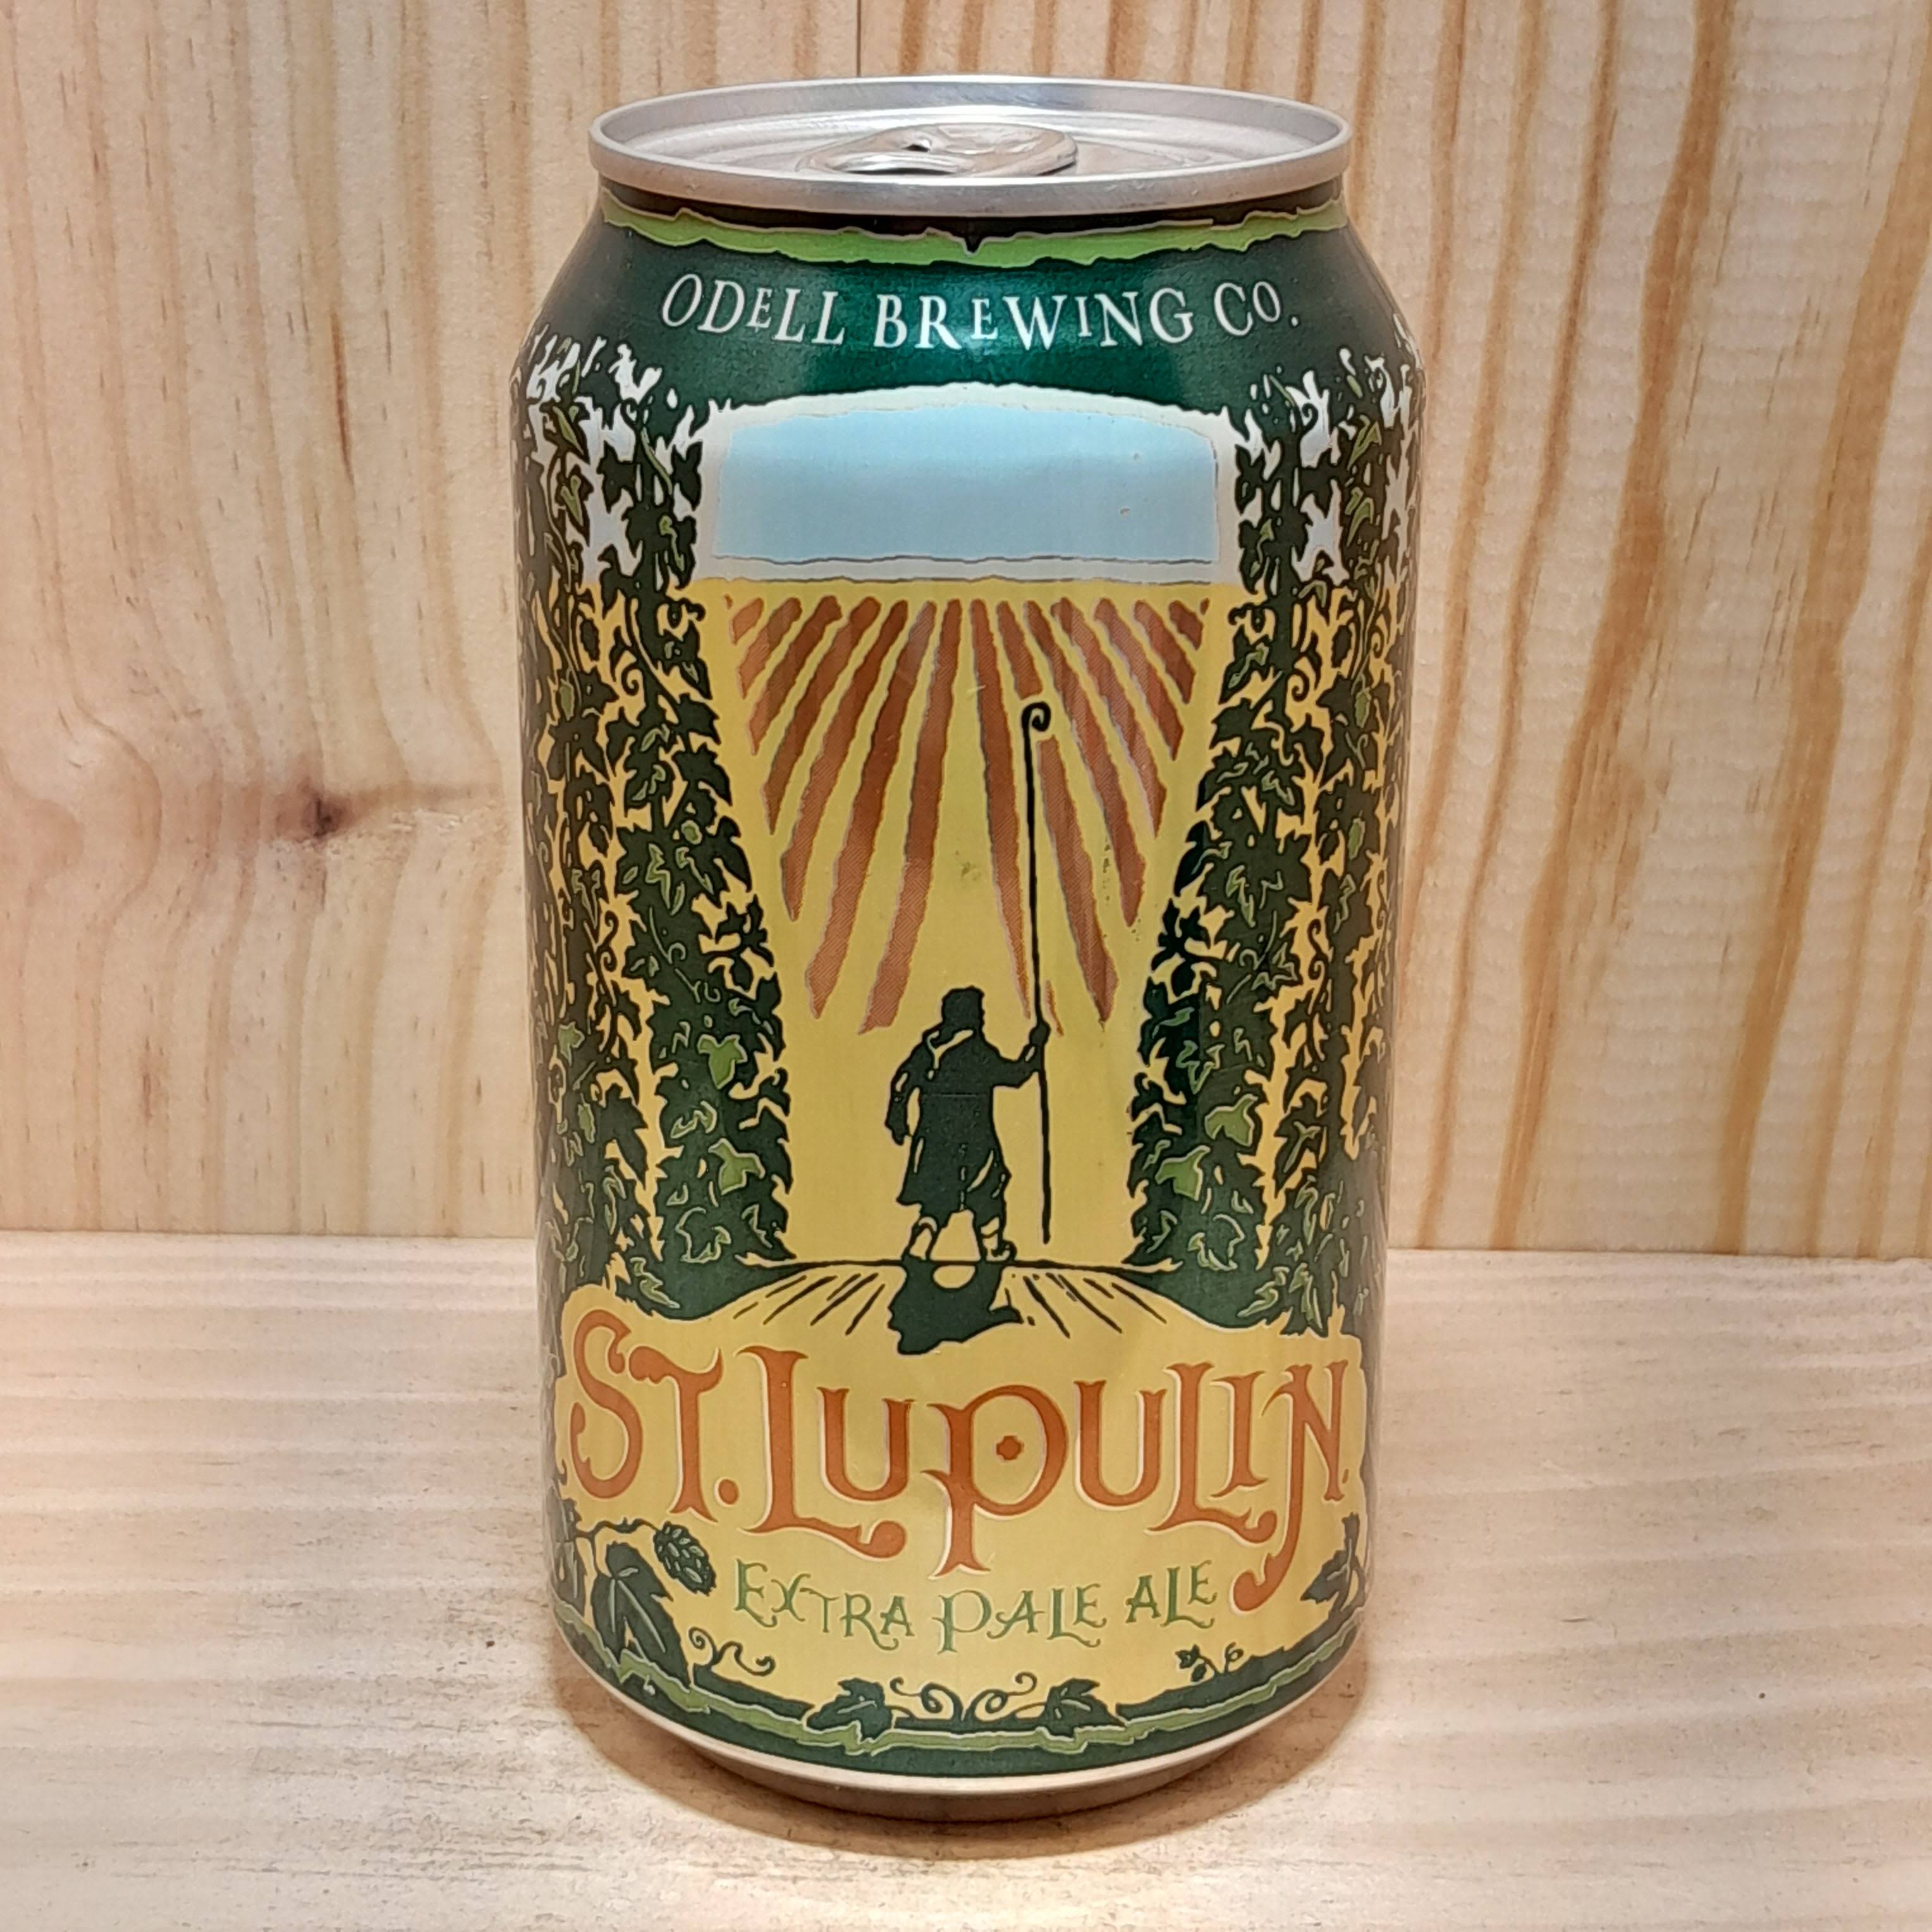 Odell Brewing- St. Lupulin Extra Pale Ale 6.5% ABV 355ml Can